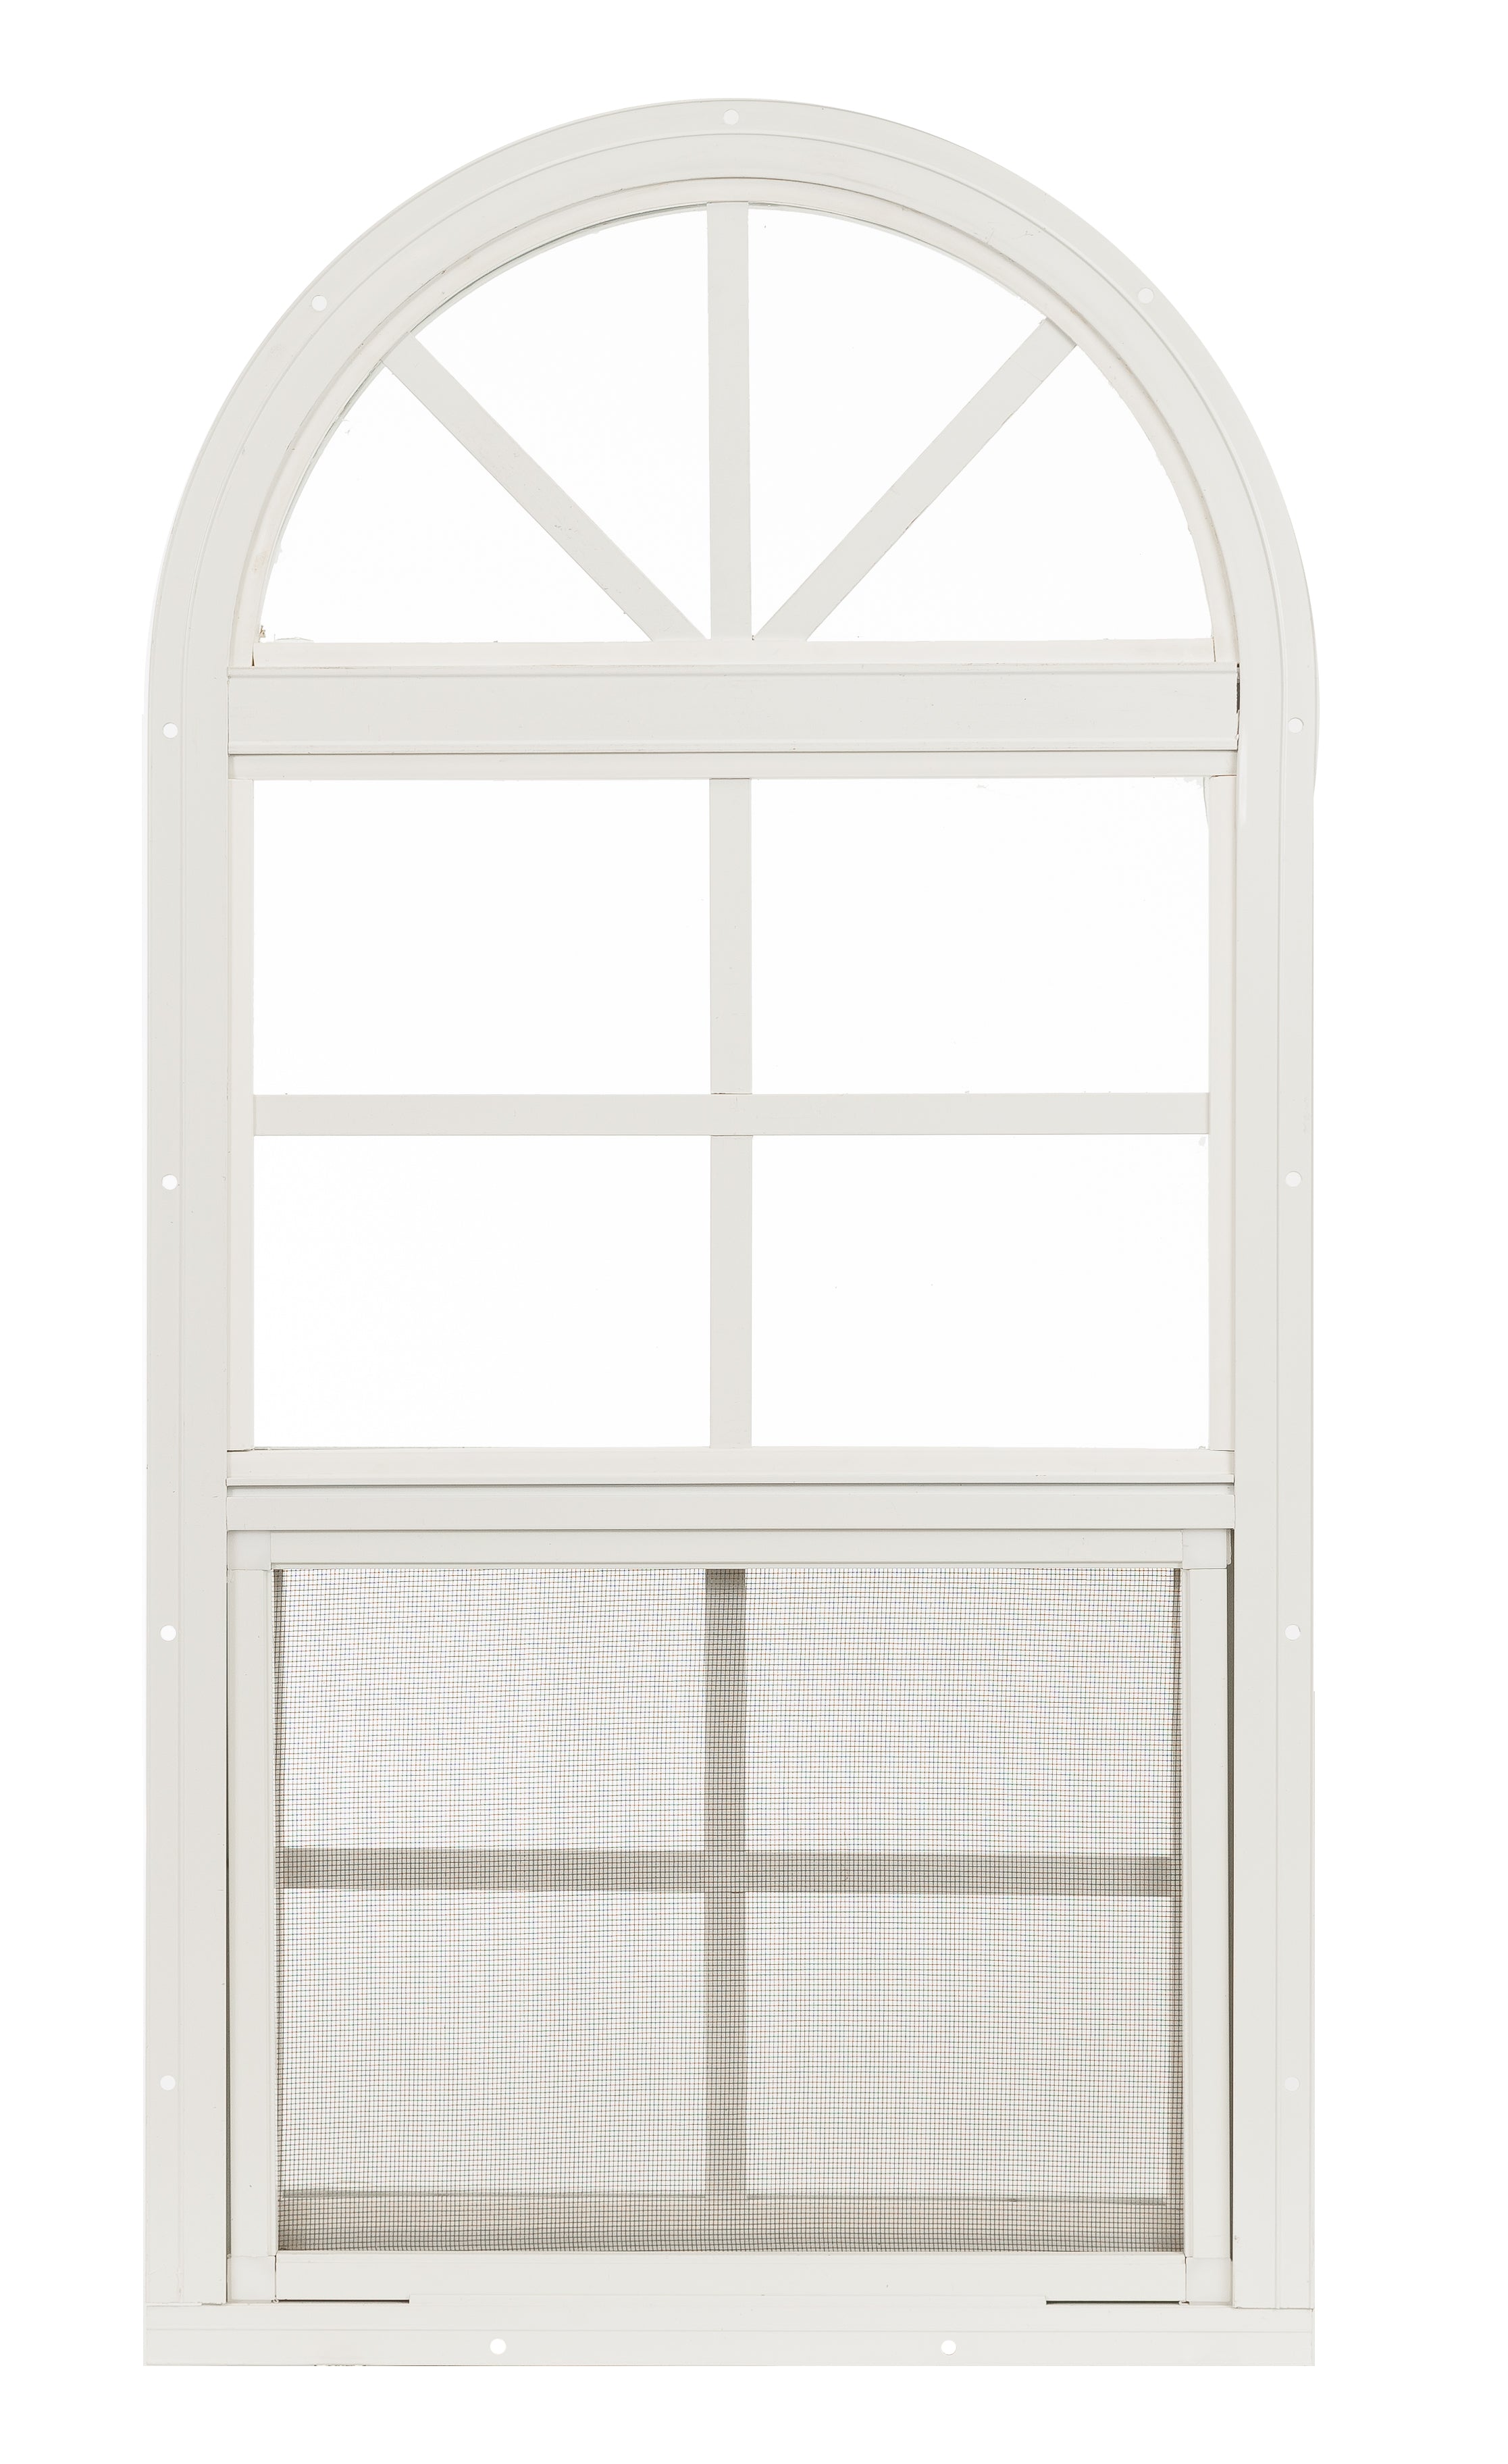 14" W x 28" H Arch Top Window for Sheds, Playhouses, and MORE 